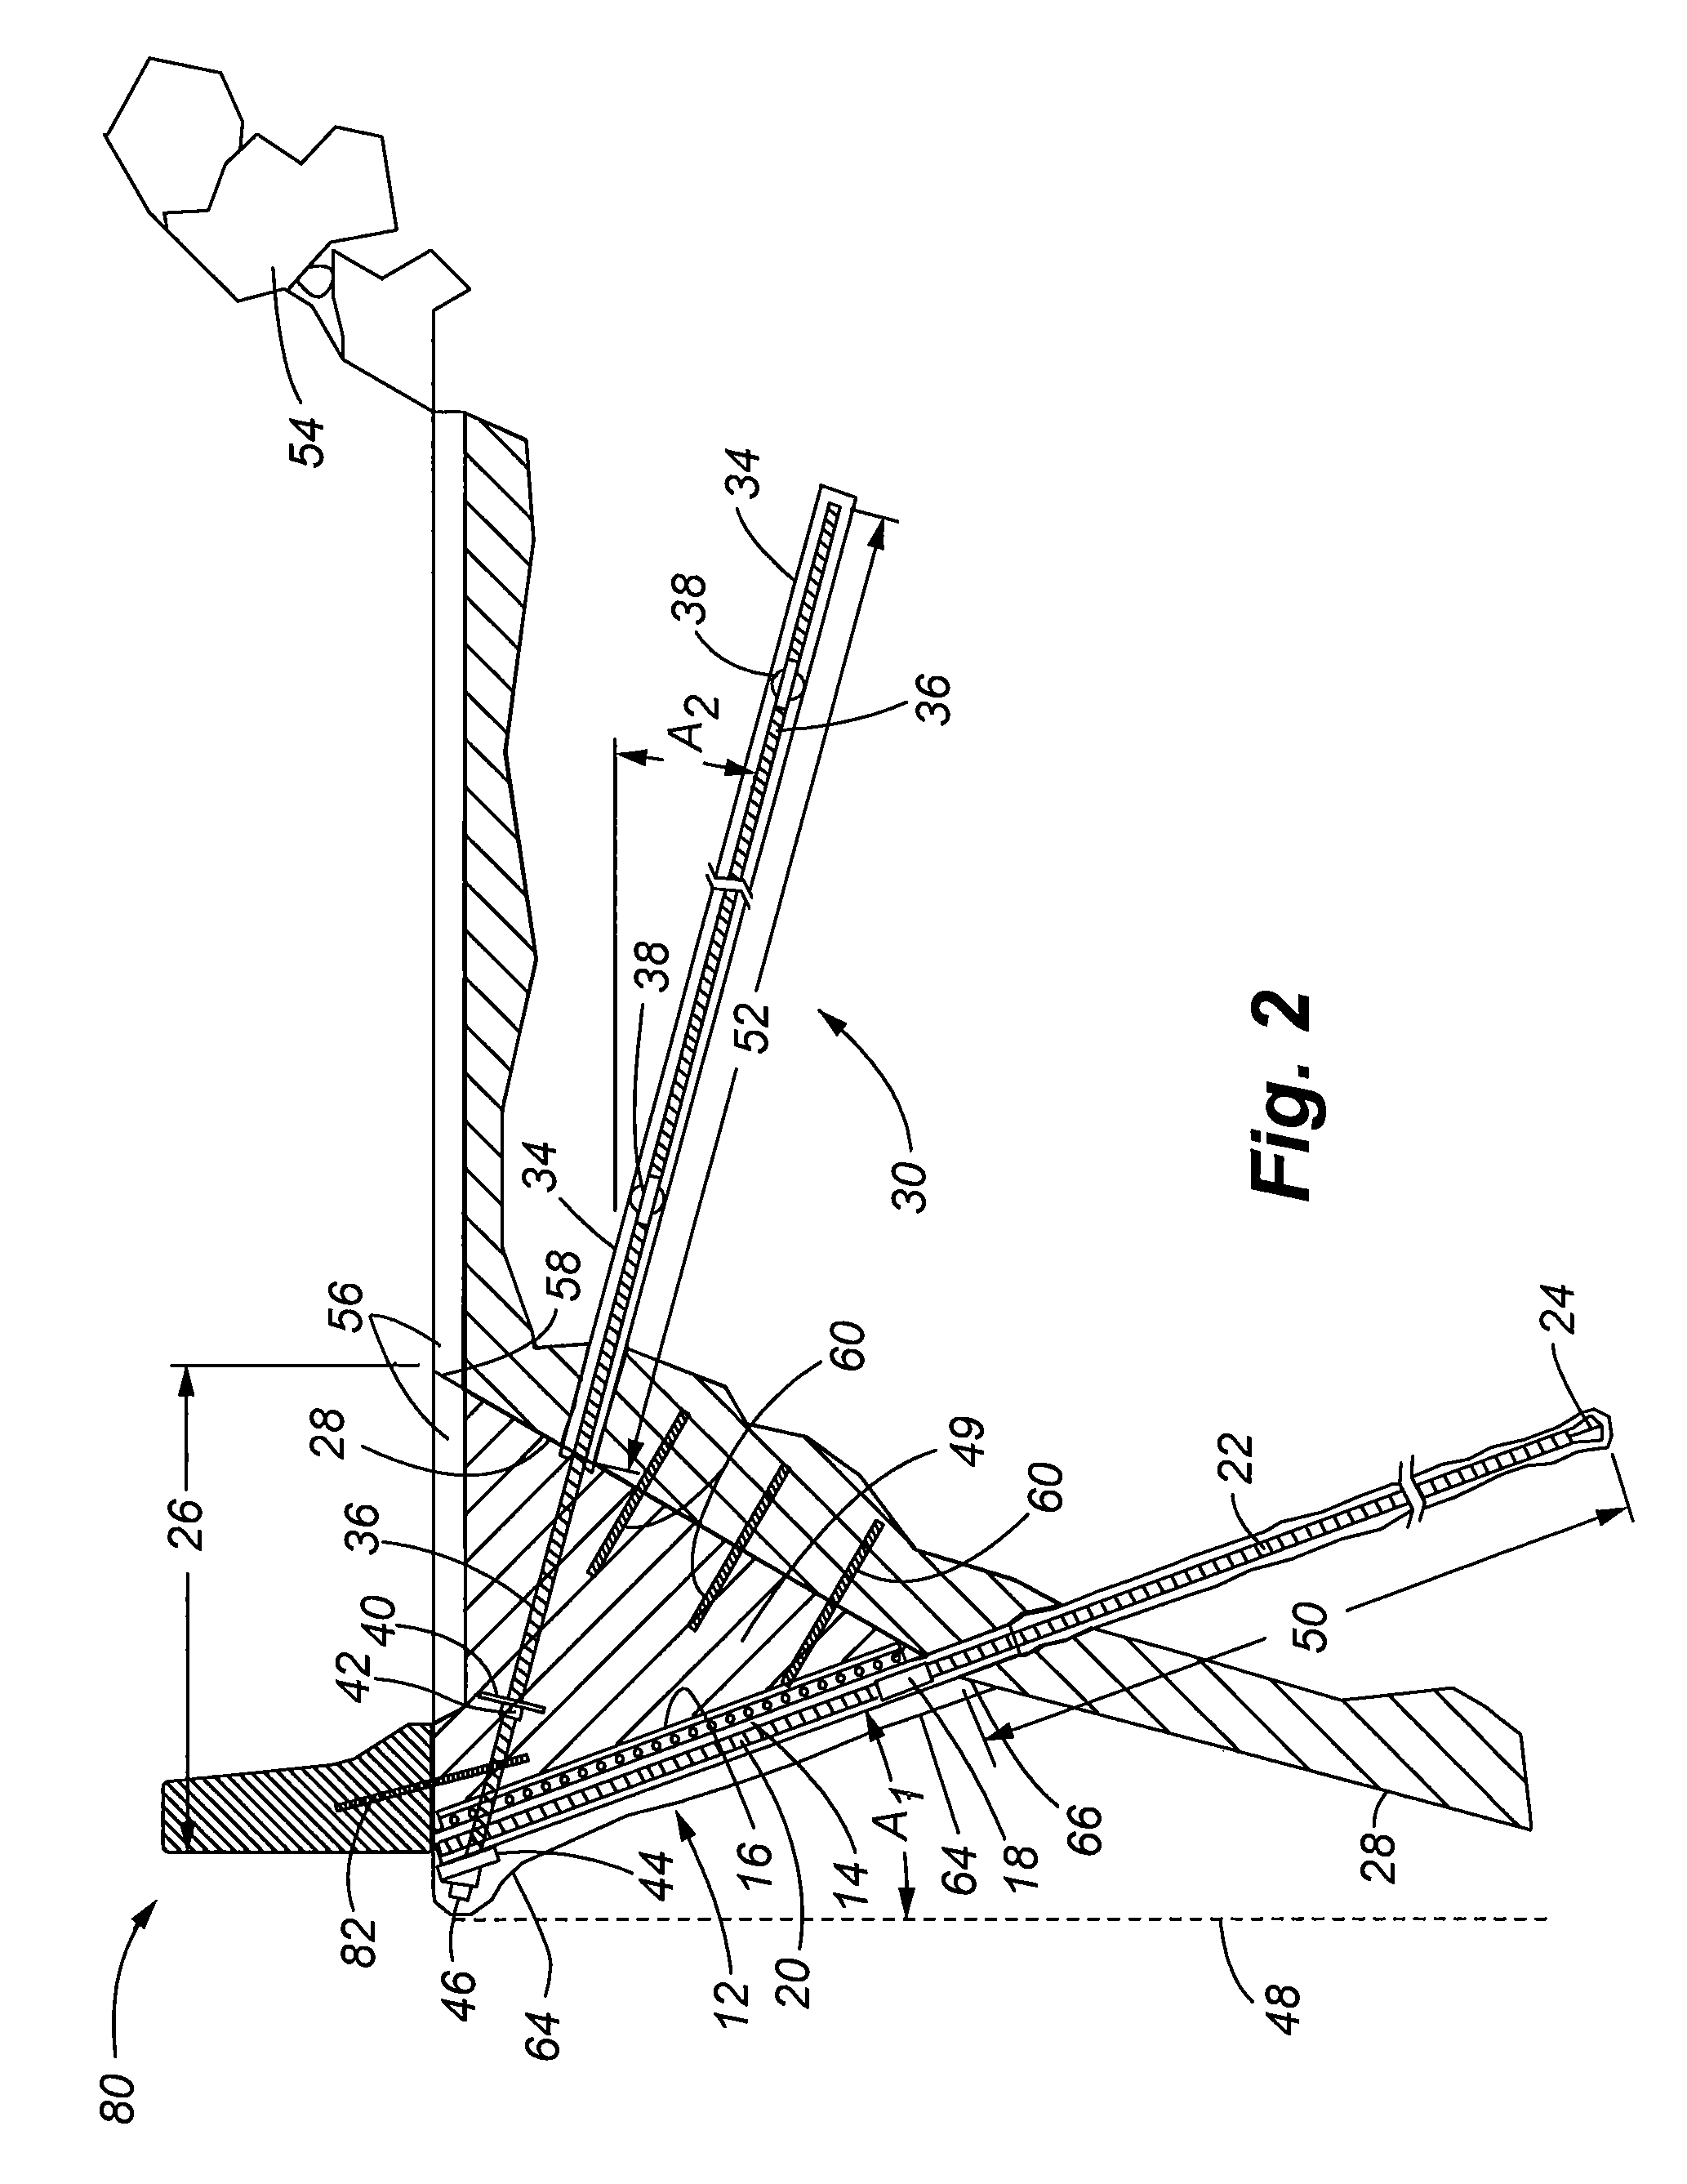 System and method for increasing roadway width incorporating a reverse oriented retaining wall and soil nail supports